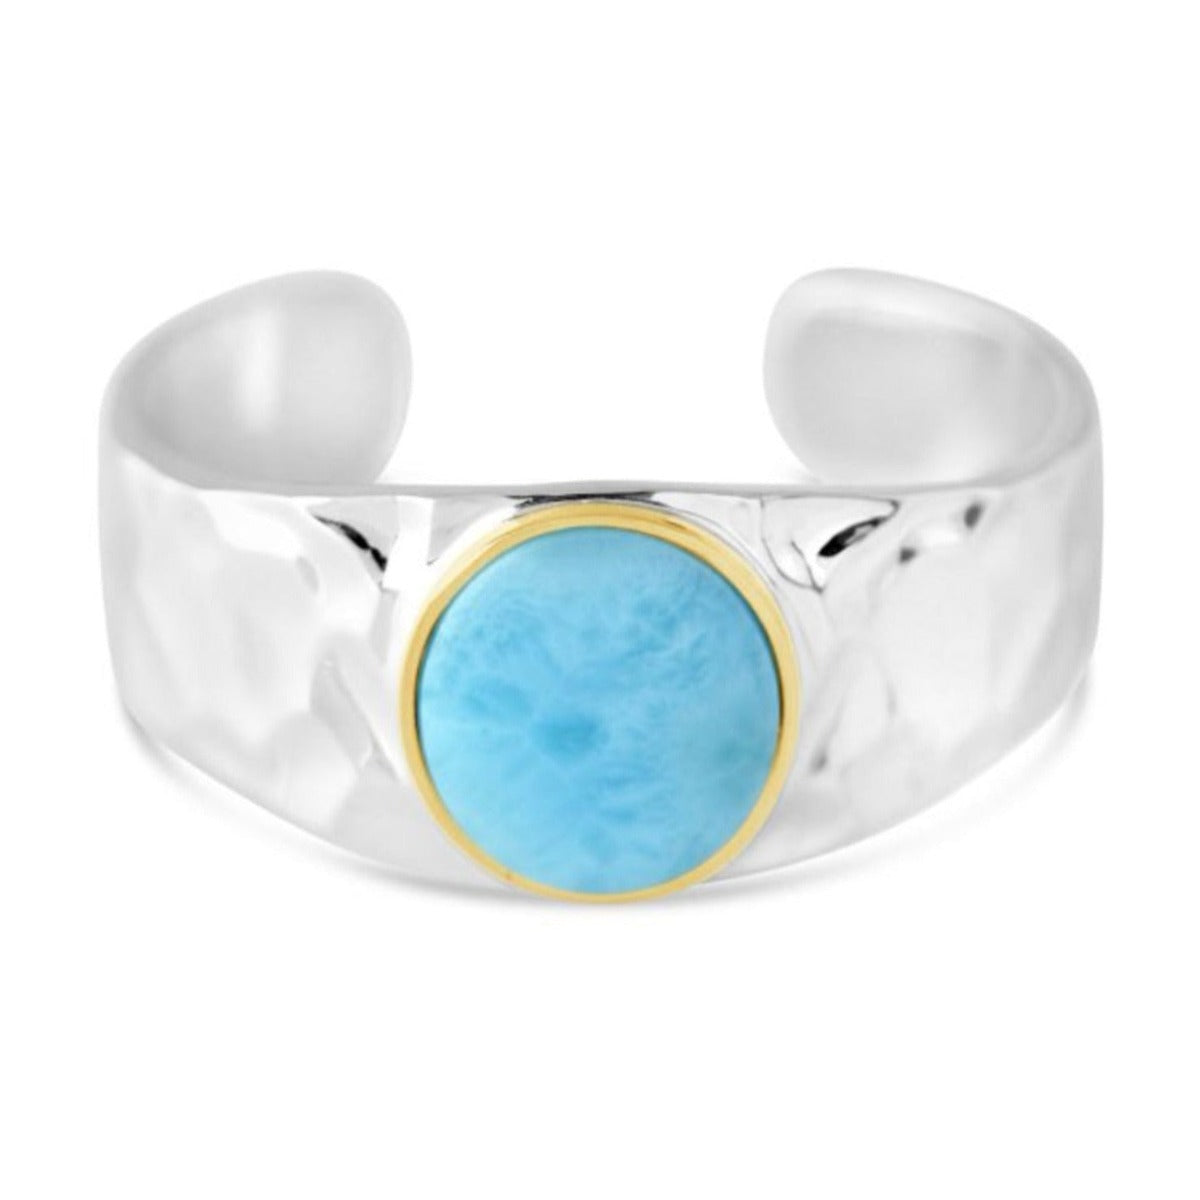 Dune Jewelry Dune Jewelry - Round Hammered Two Tone Cuff - Larimar available at The Good Life Boutique